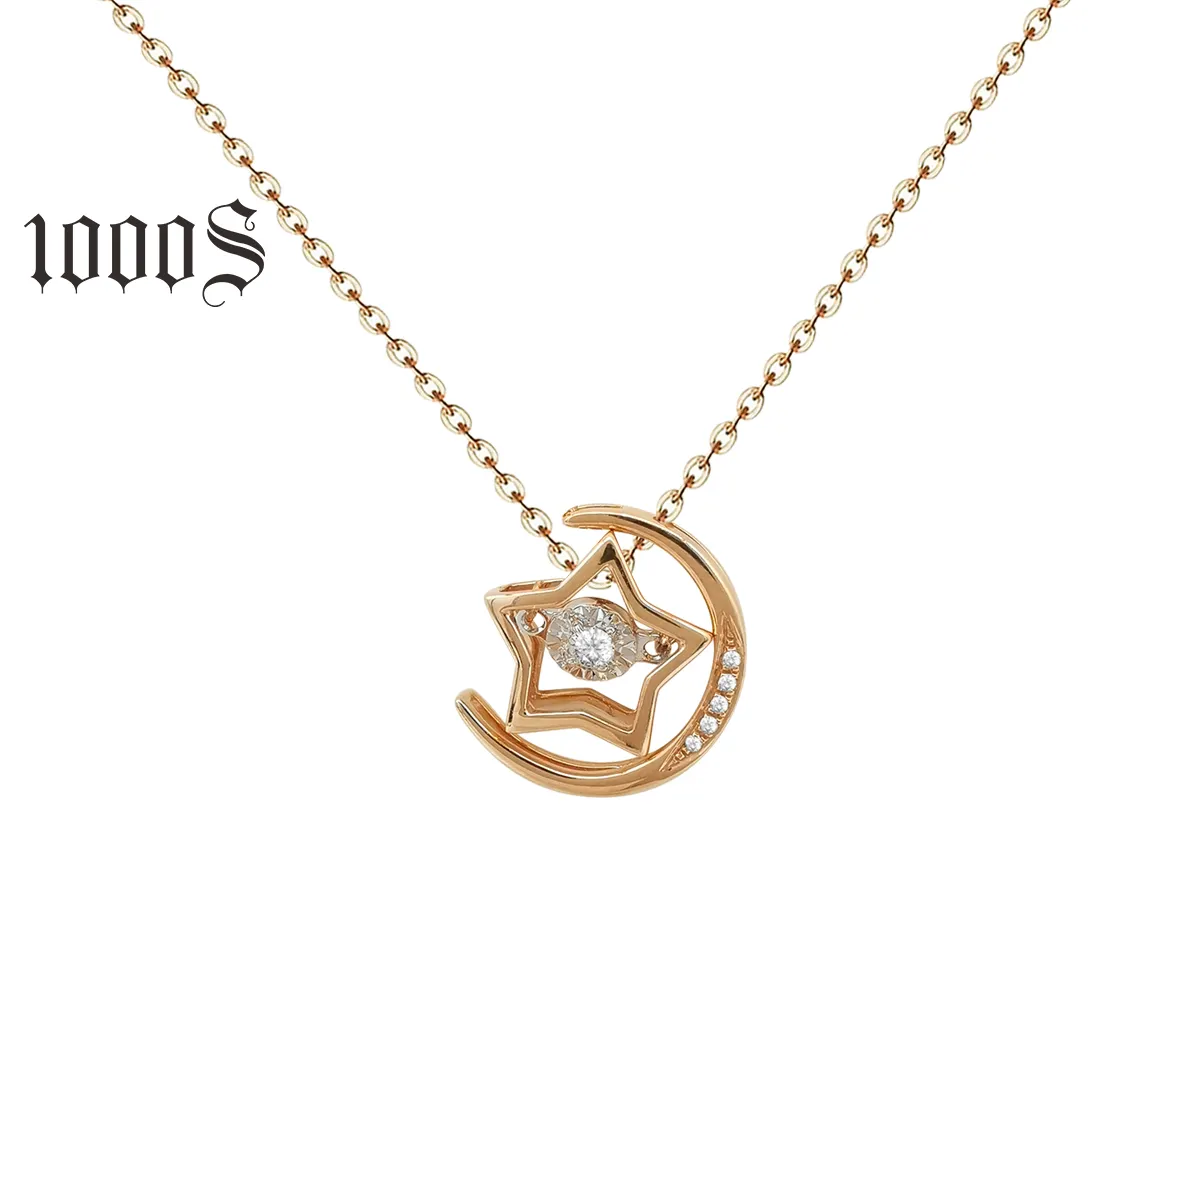 Women Necklace Jewelry Diamond Jewelry Necklace Link Chain Necklaces Fashion Moon Star 18k Real Gold Pendant Rose Gold 1 Pcs